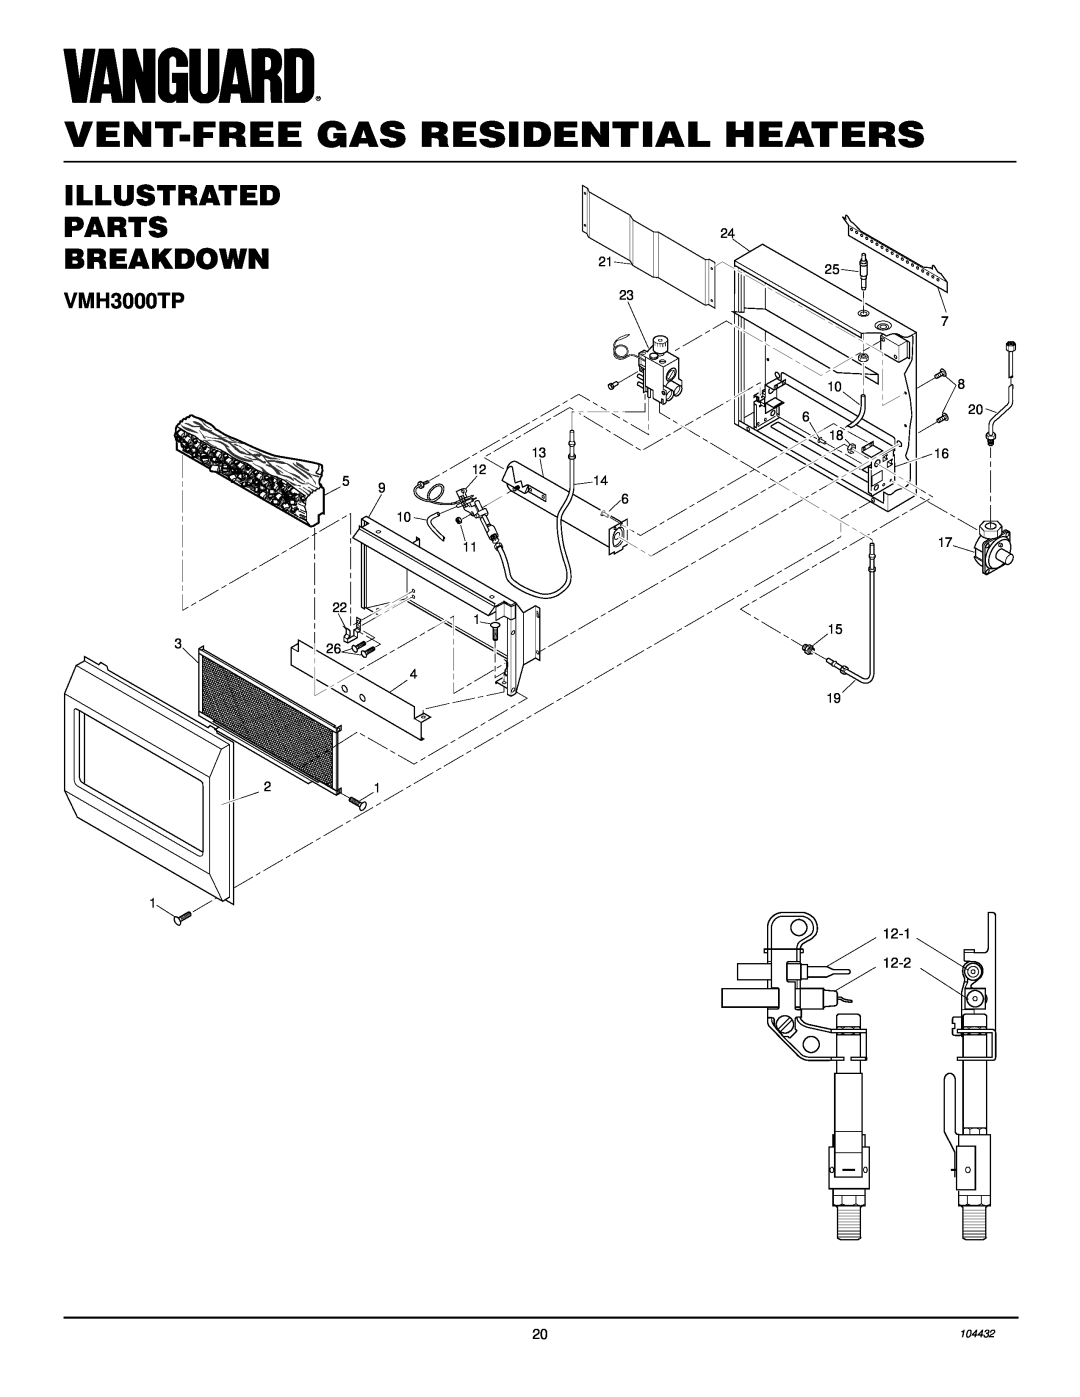 Vanguard Heating VMH3000TP installation manual ILLUSTRATED PARTS BREAKDOWN21, Vent-Freegas Residential Heaters 